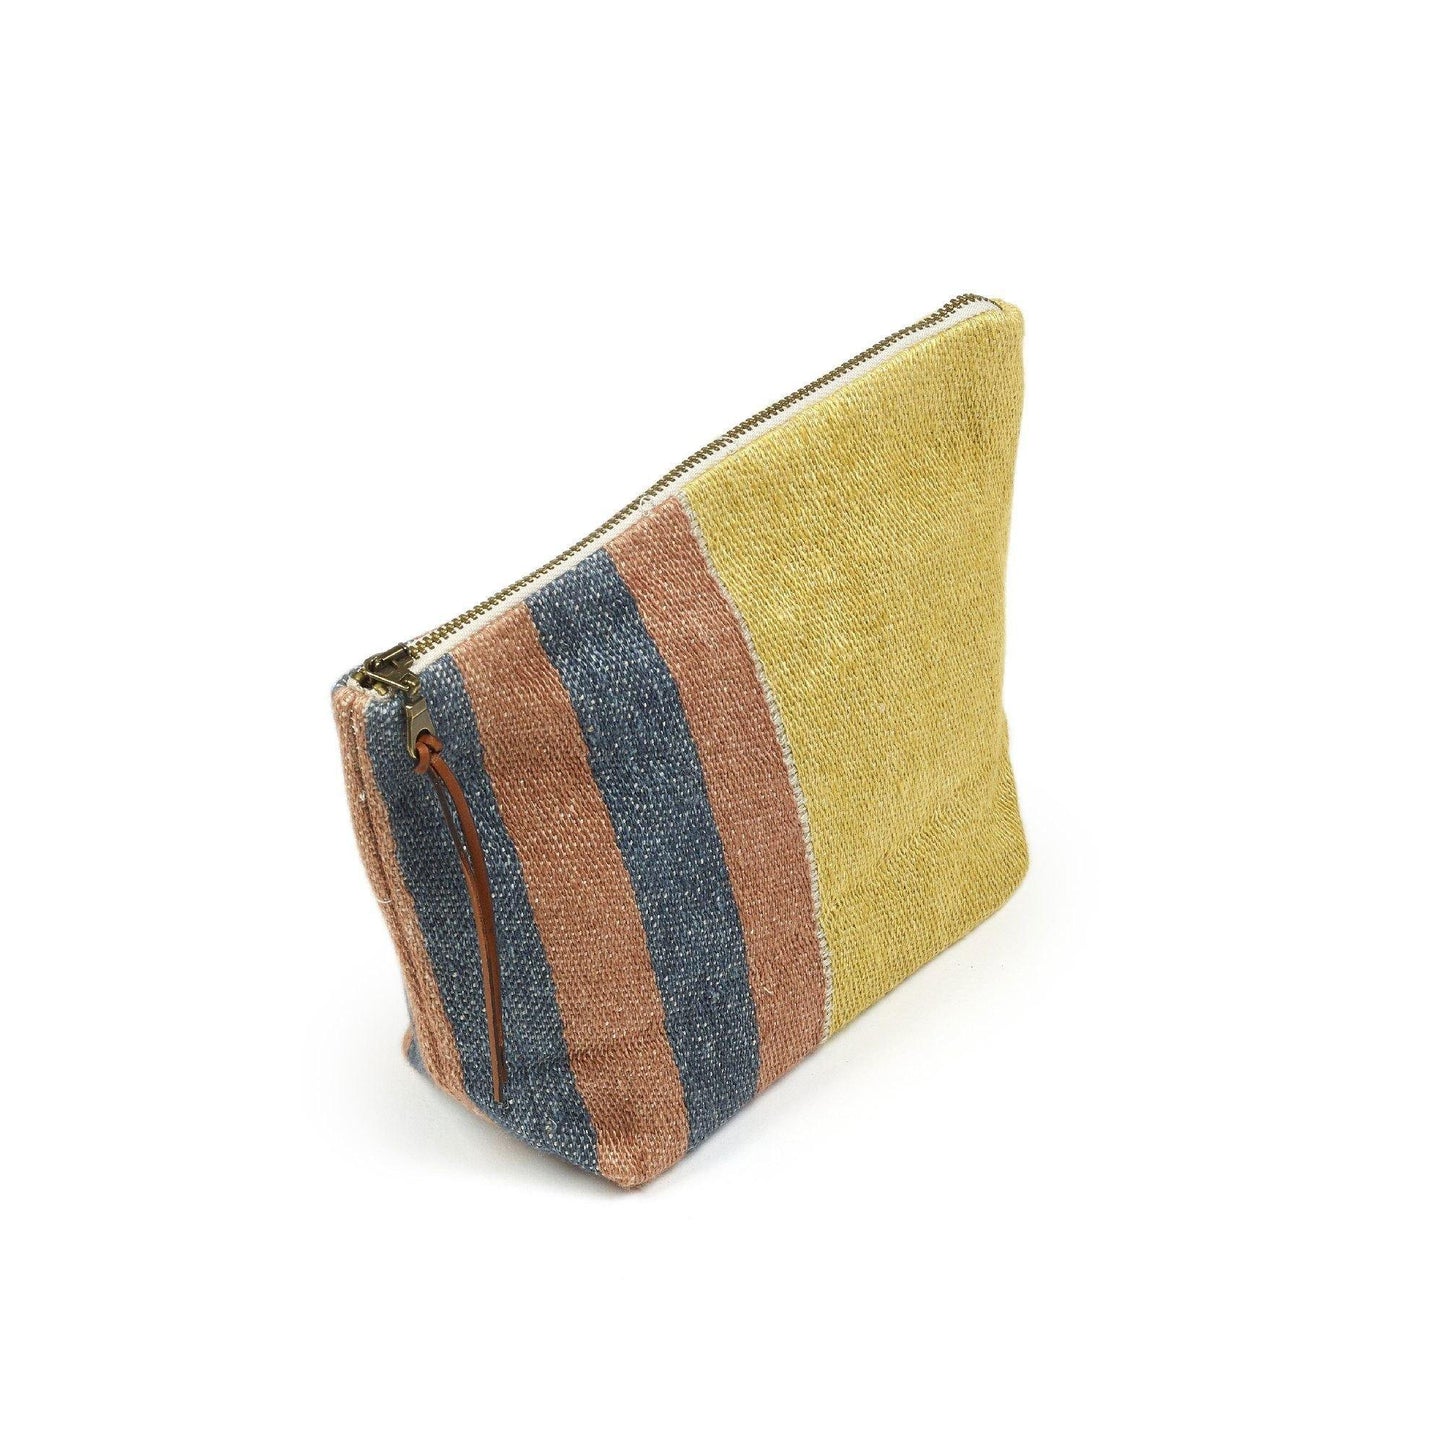 Belgian linen pouch product shot in color Red Earth by Libeco for South Hous.